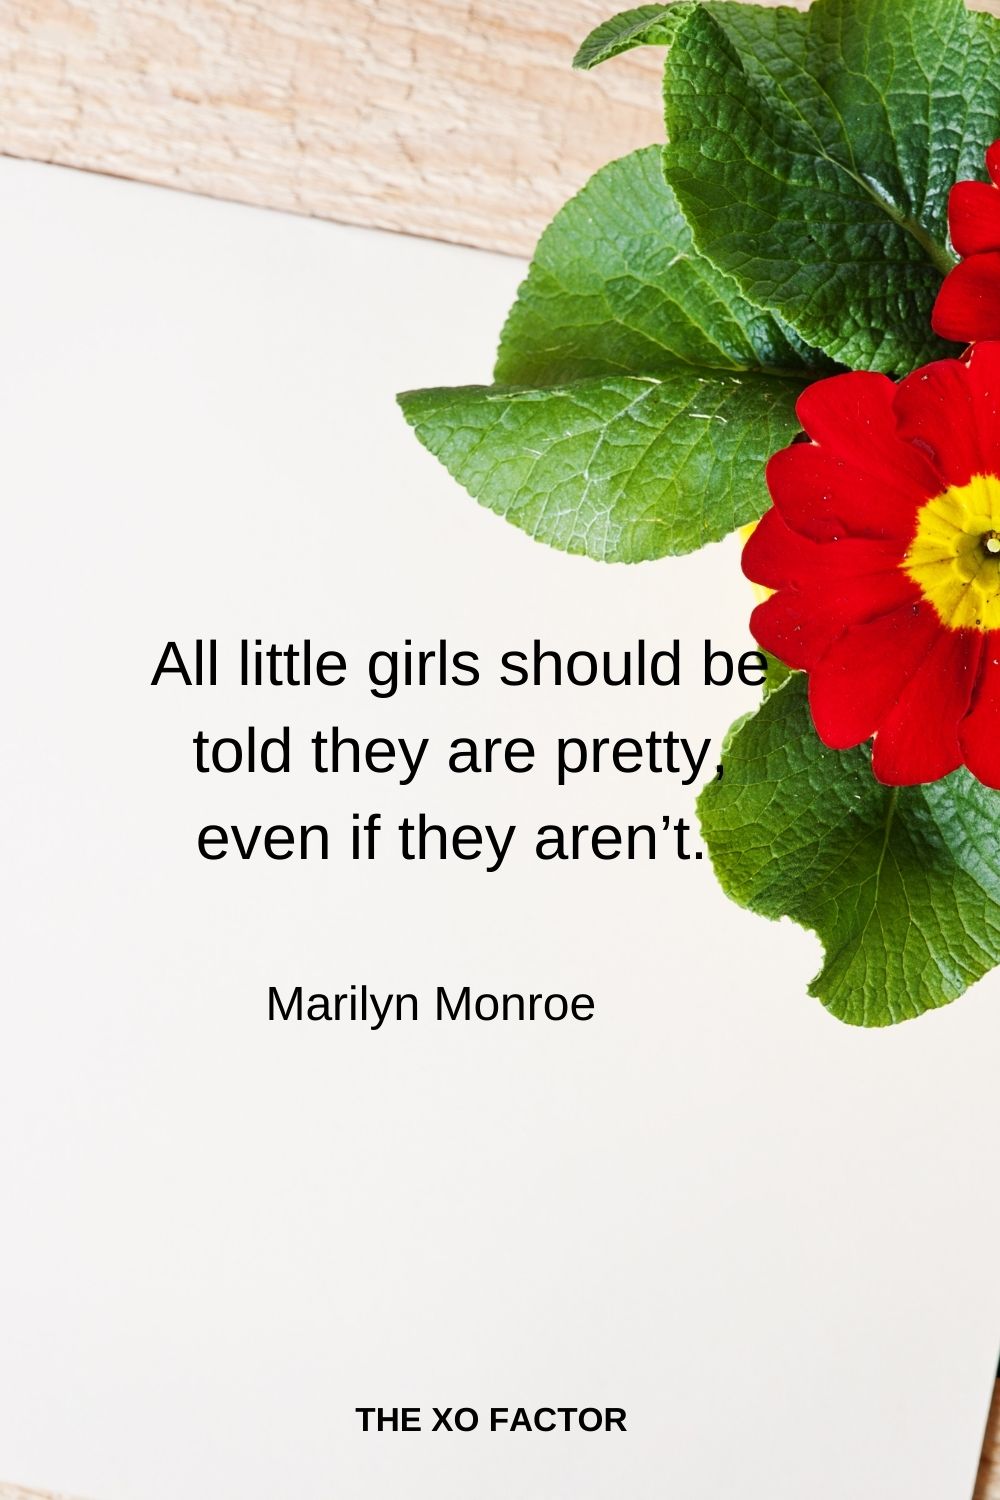 All little girls should be told they are pretty, even if they aren’t.  Marilyn Monroe